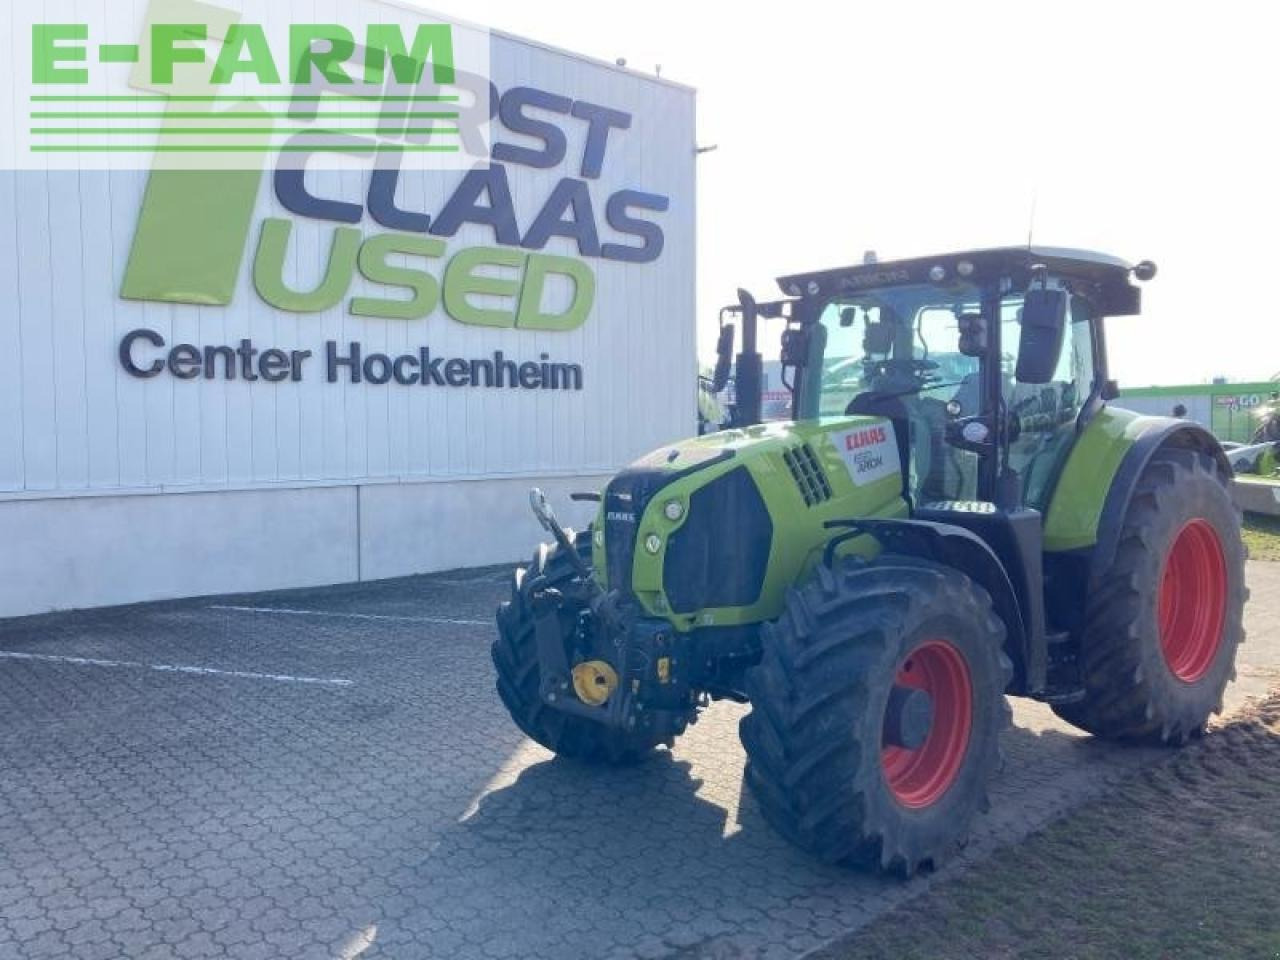 Tractor CLAAS arion 650 st4 cmatic